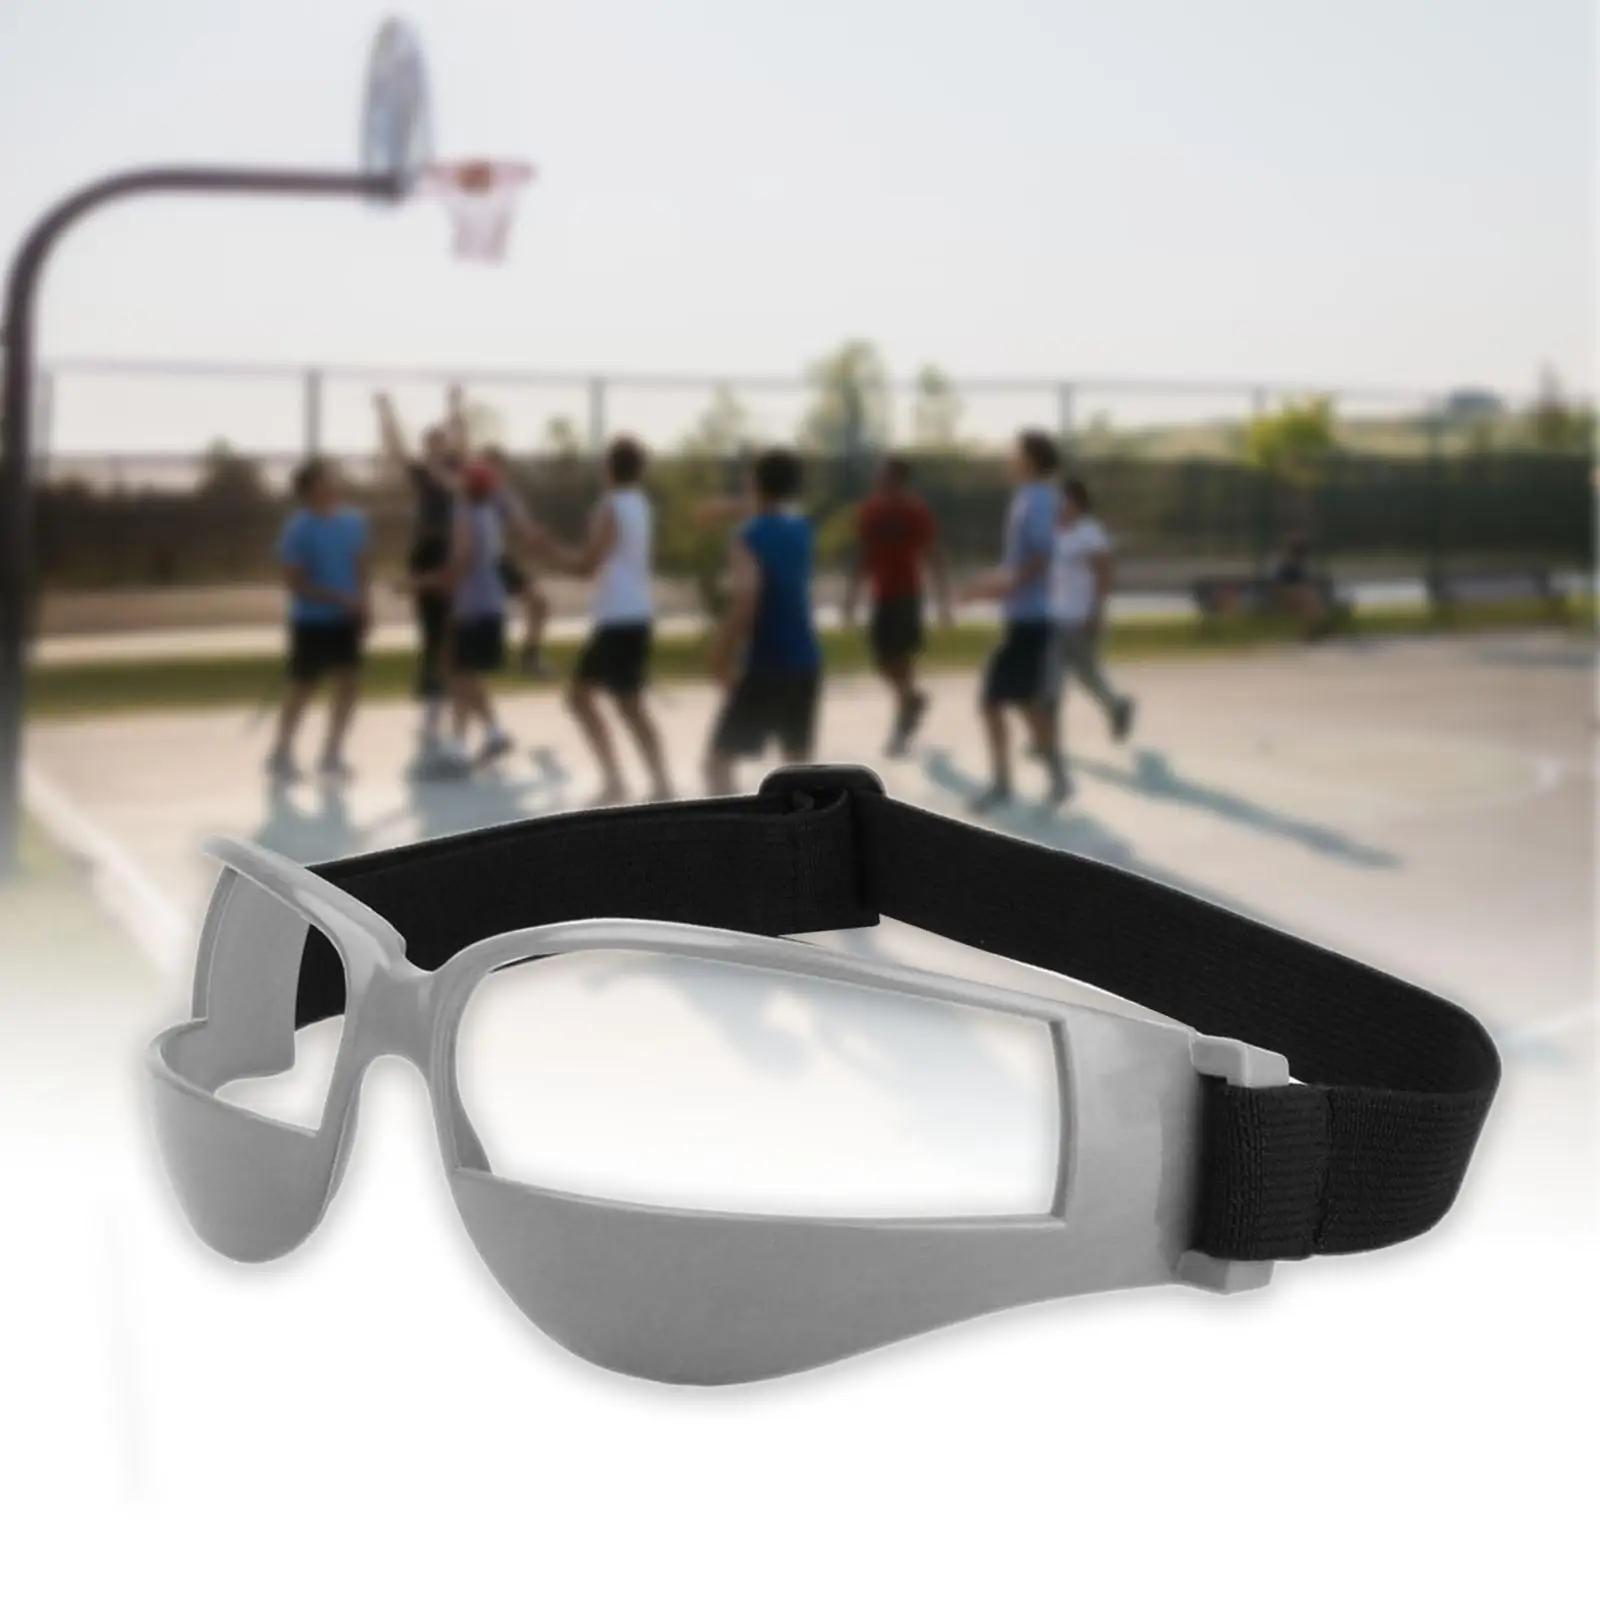 Professional Basketball Goggles Dribbling Specs Anti Fog Shock Collision Safety Eyewear for Racketball Tennis Men Youth Kids